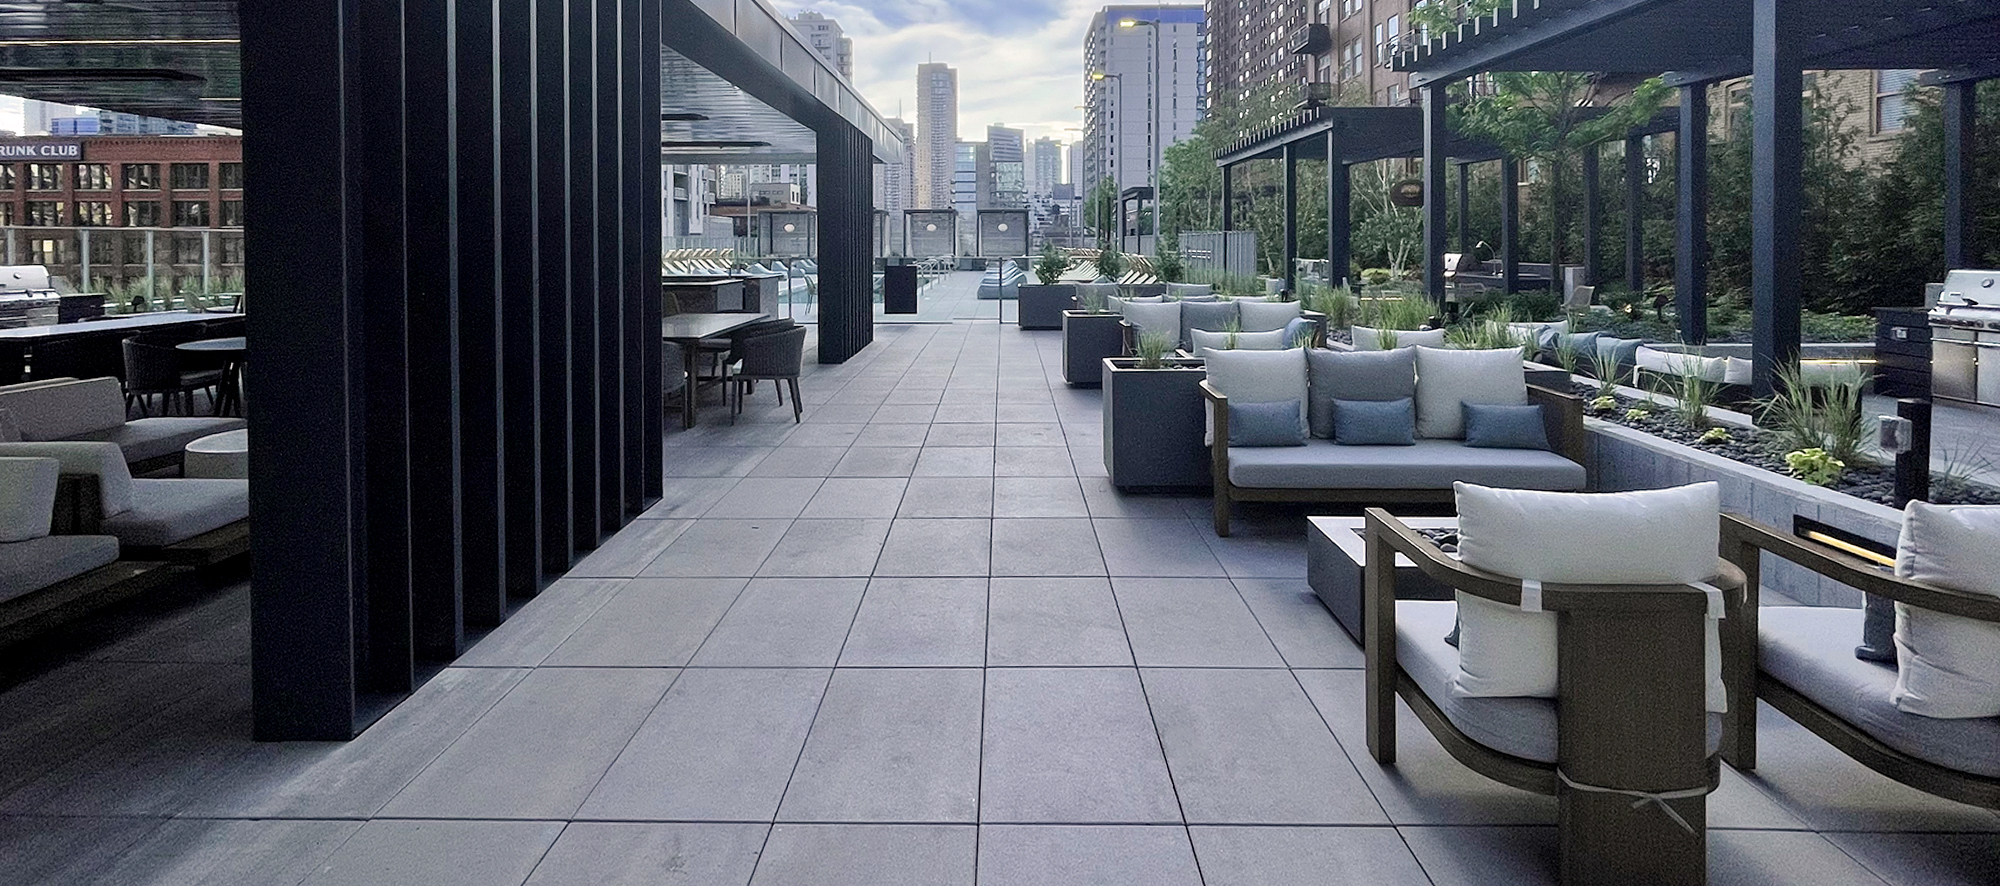 A view of the 369 W Grand roof deck outdoor kitchens and seating areas overlooking the Chicago skyline.